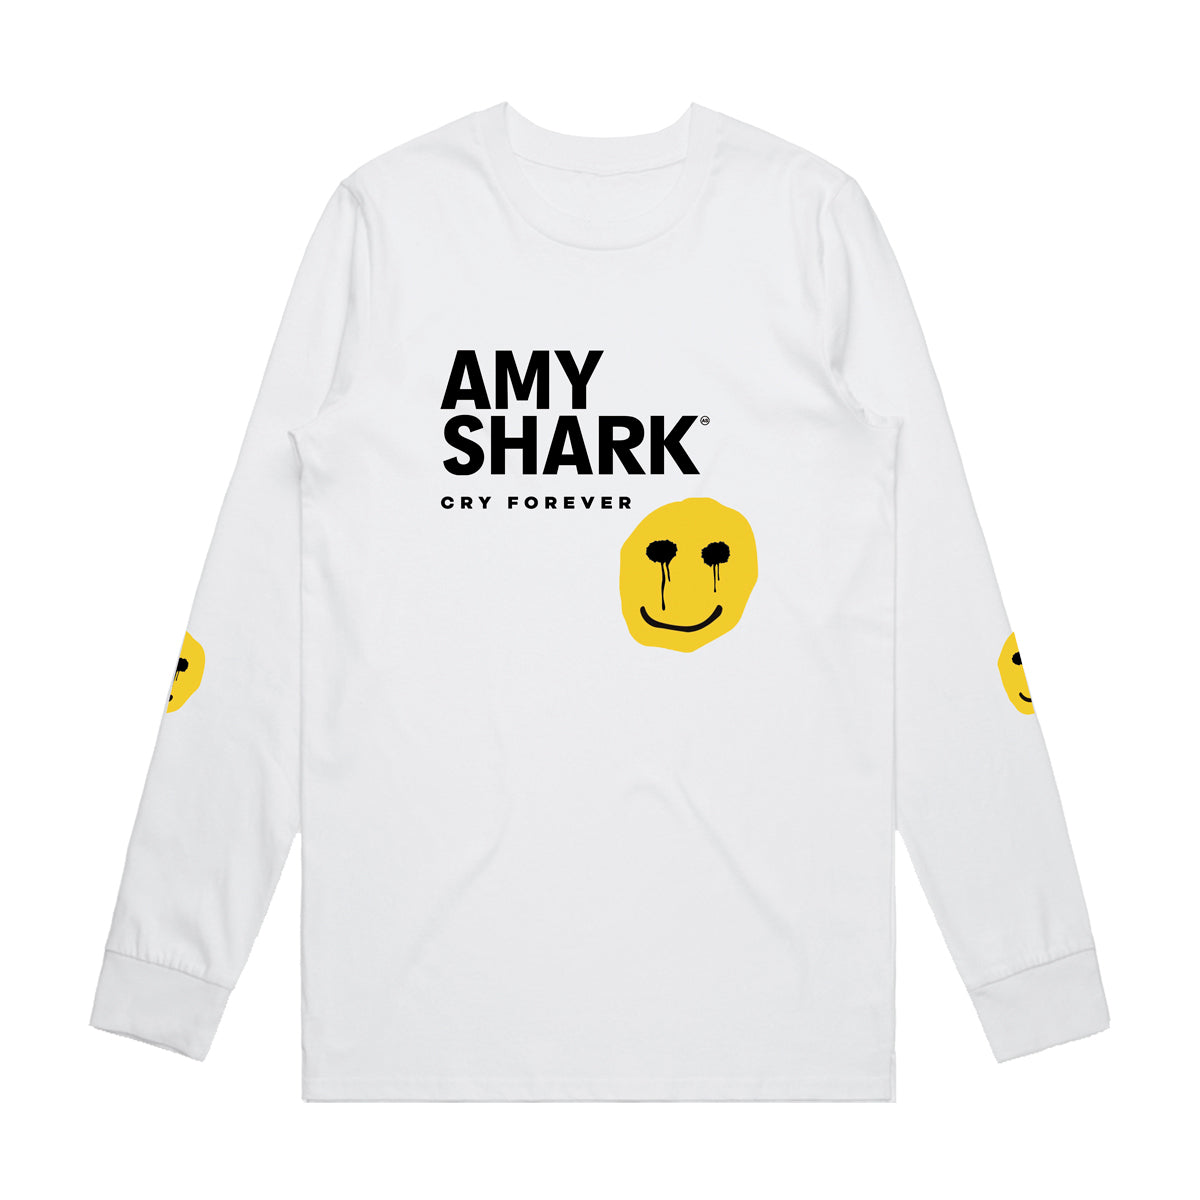 White long sleeve top with Amy Shark Logo and crying yellow smiley face